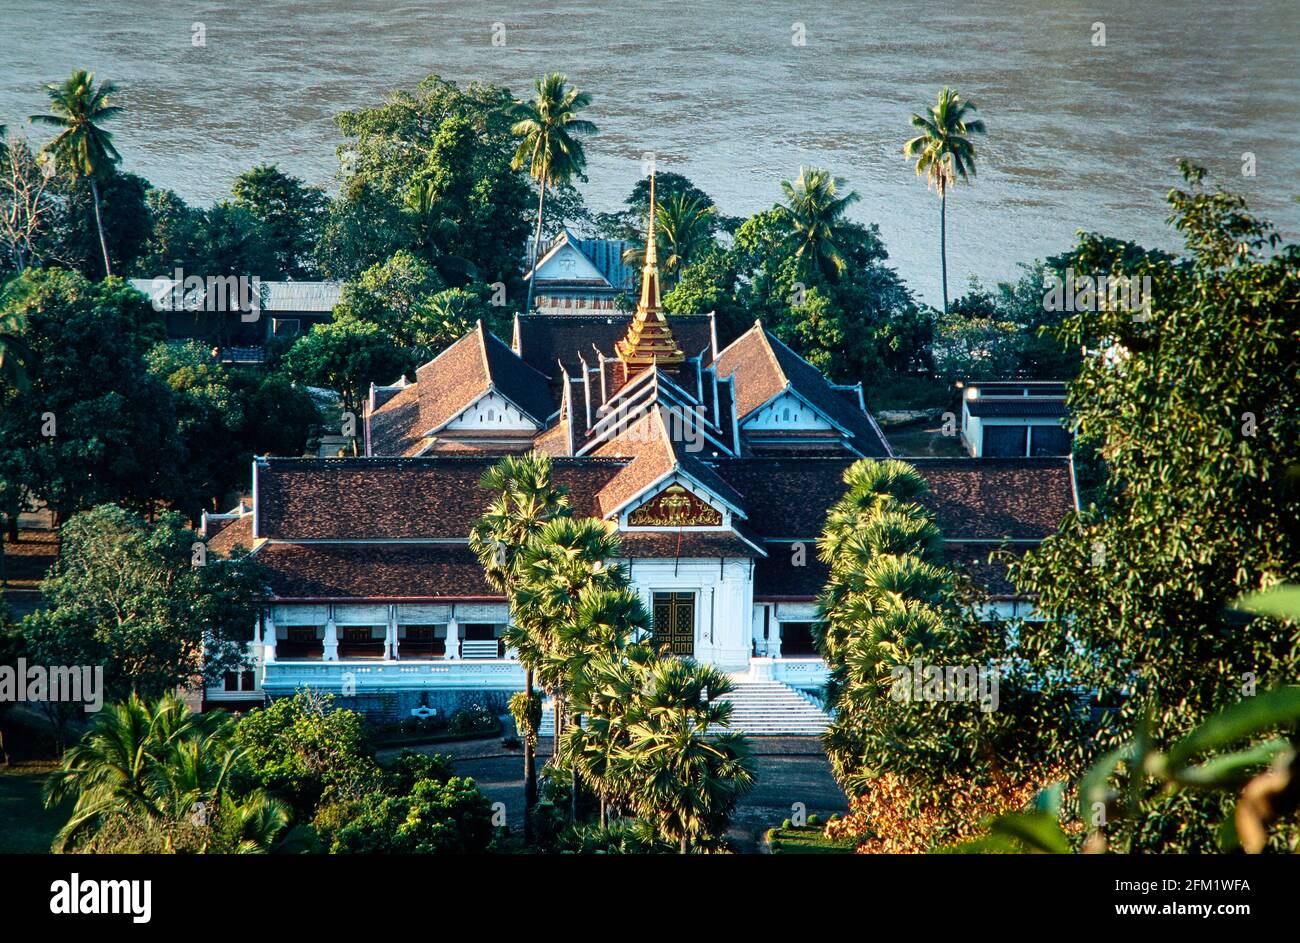 The former royal palace,  now used as a national museum, on the banks of the Mekong River in Luang Prabang.  Luang Prabang was the capital of the hist Stock Photo